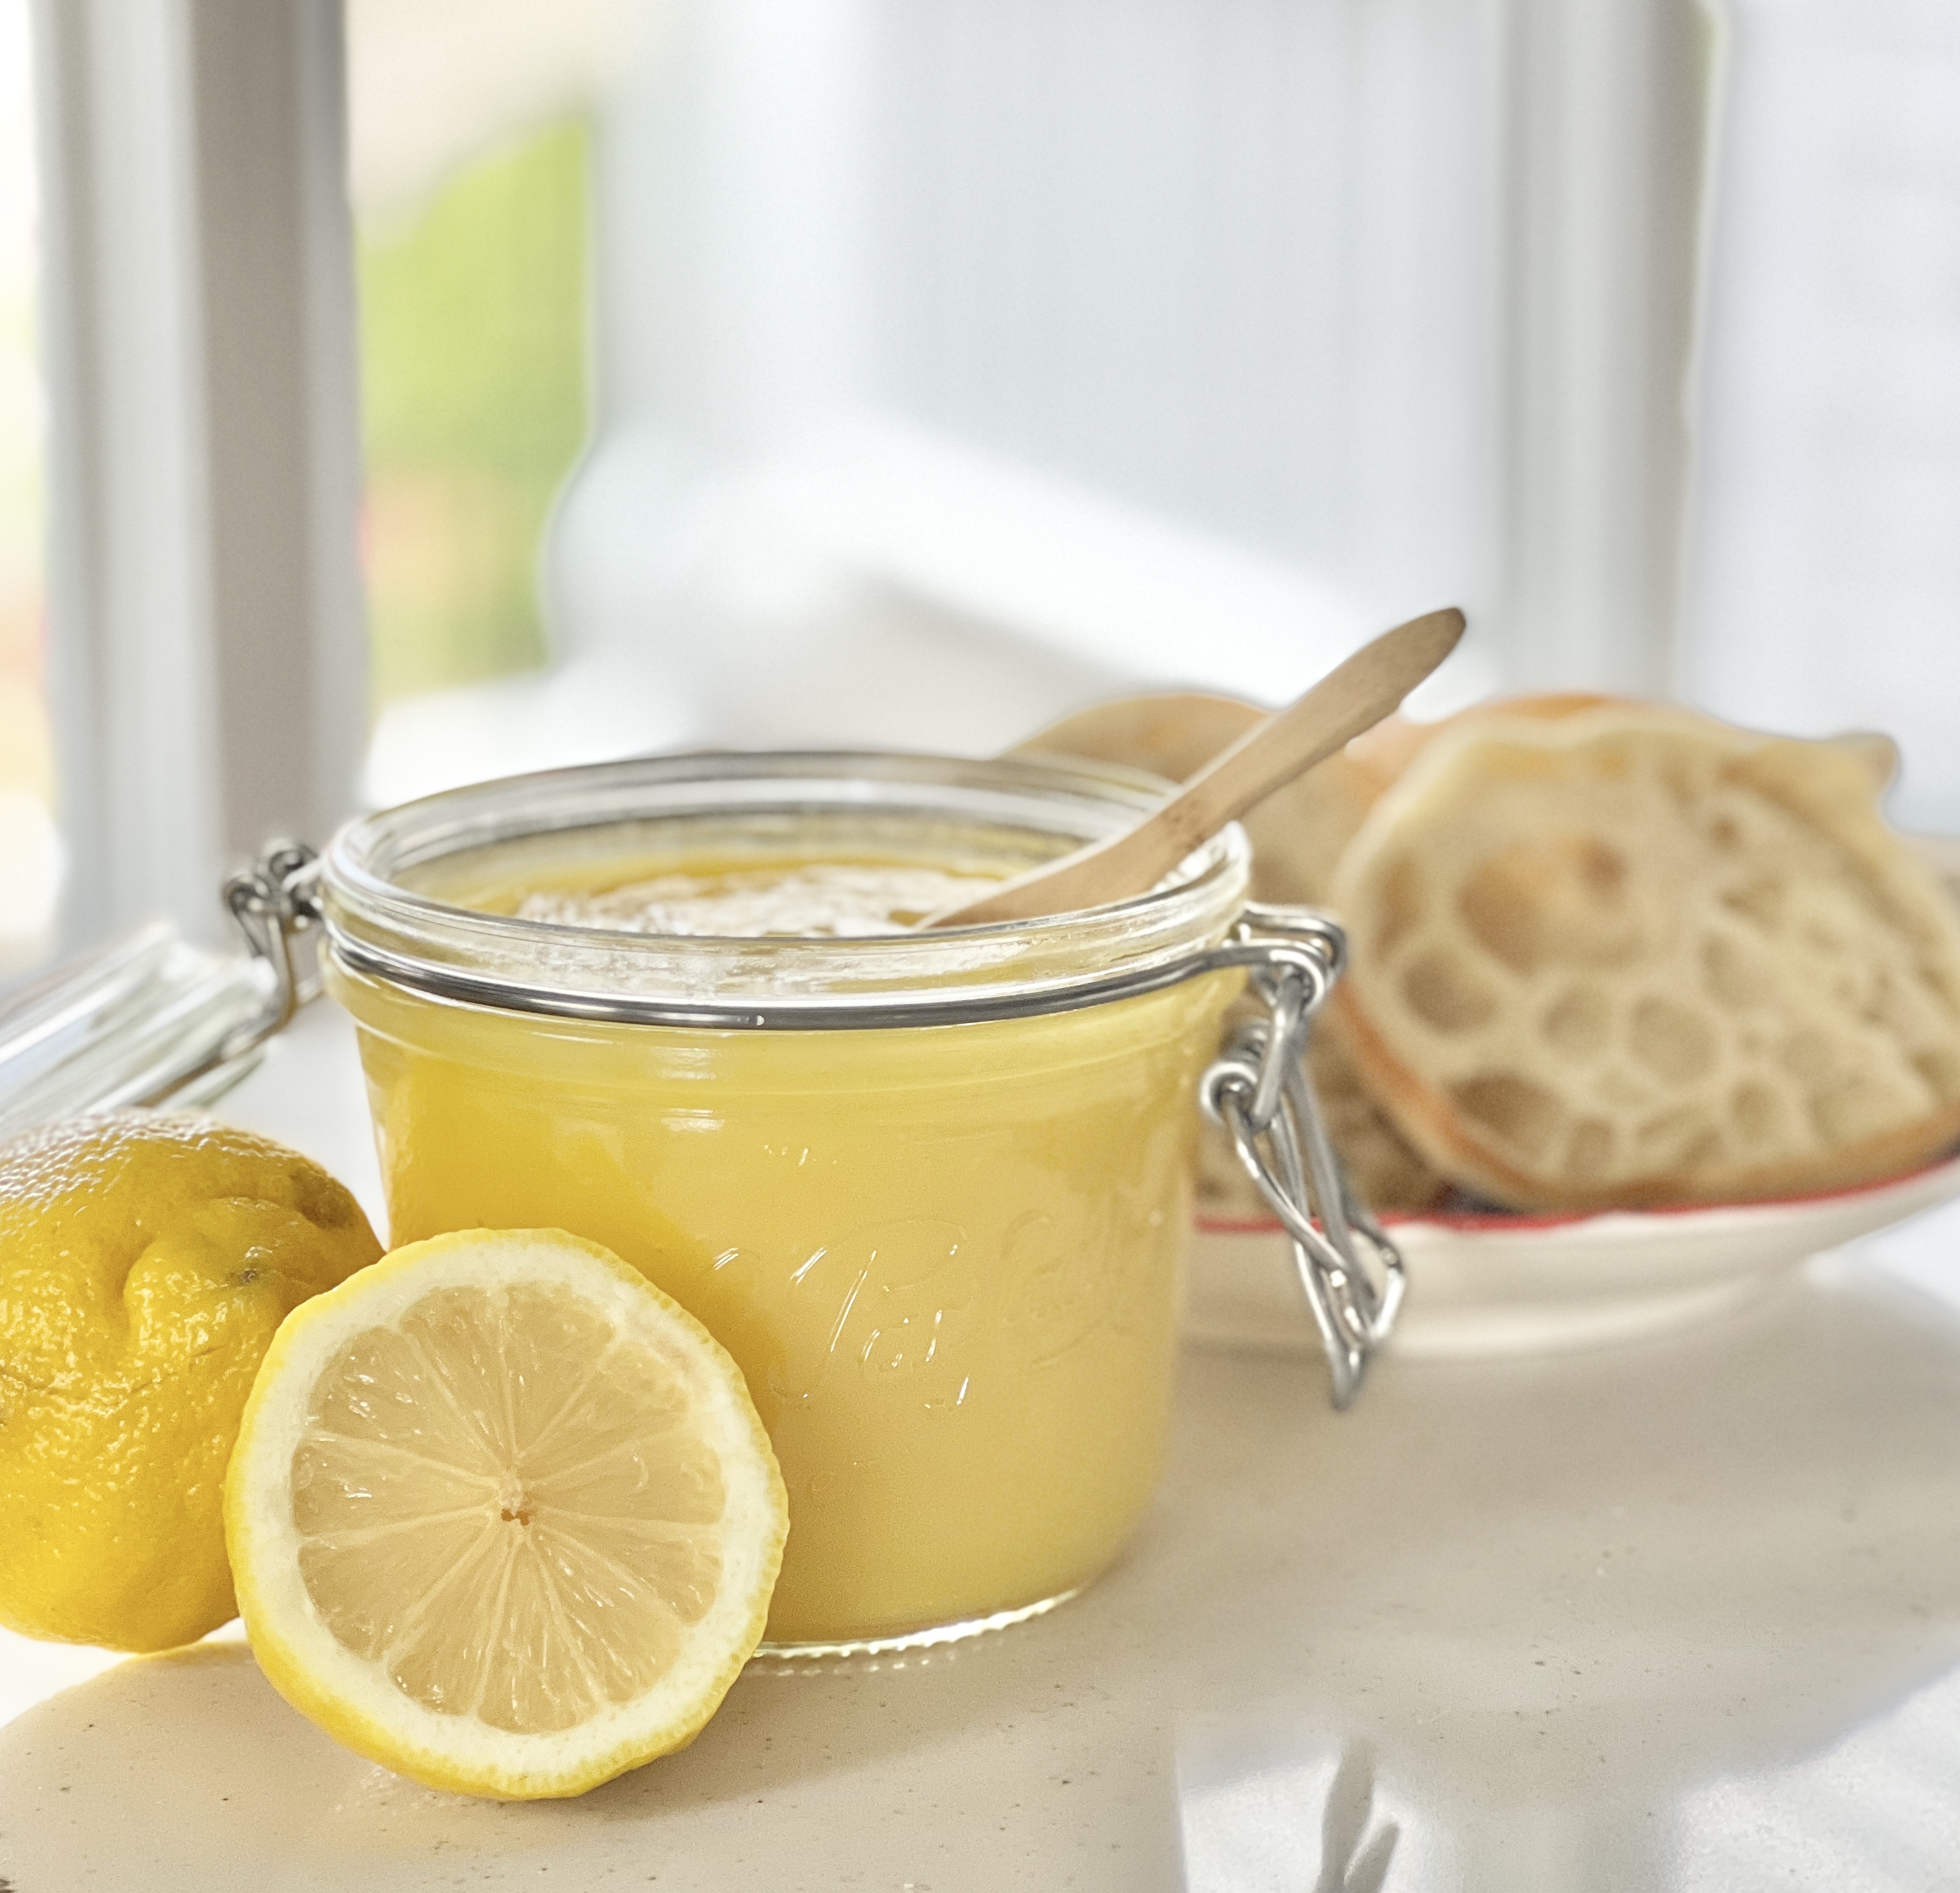 A wooden spoon dipped into a jar of fresh, homemade lemon curd.